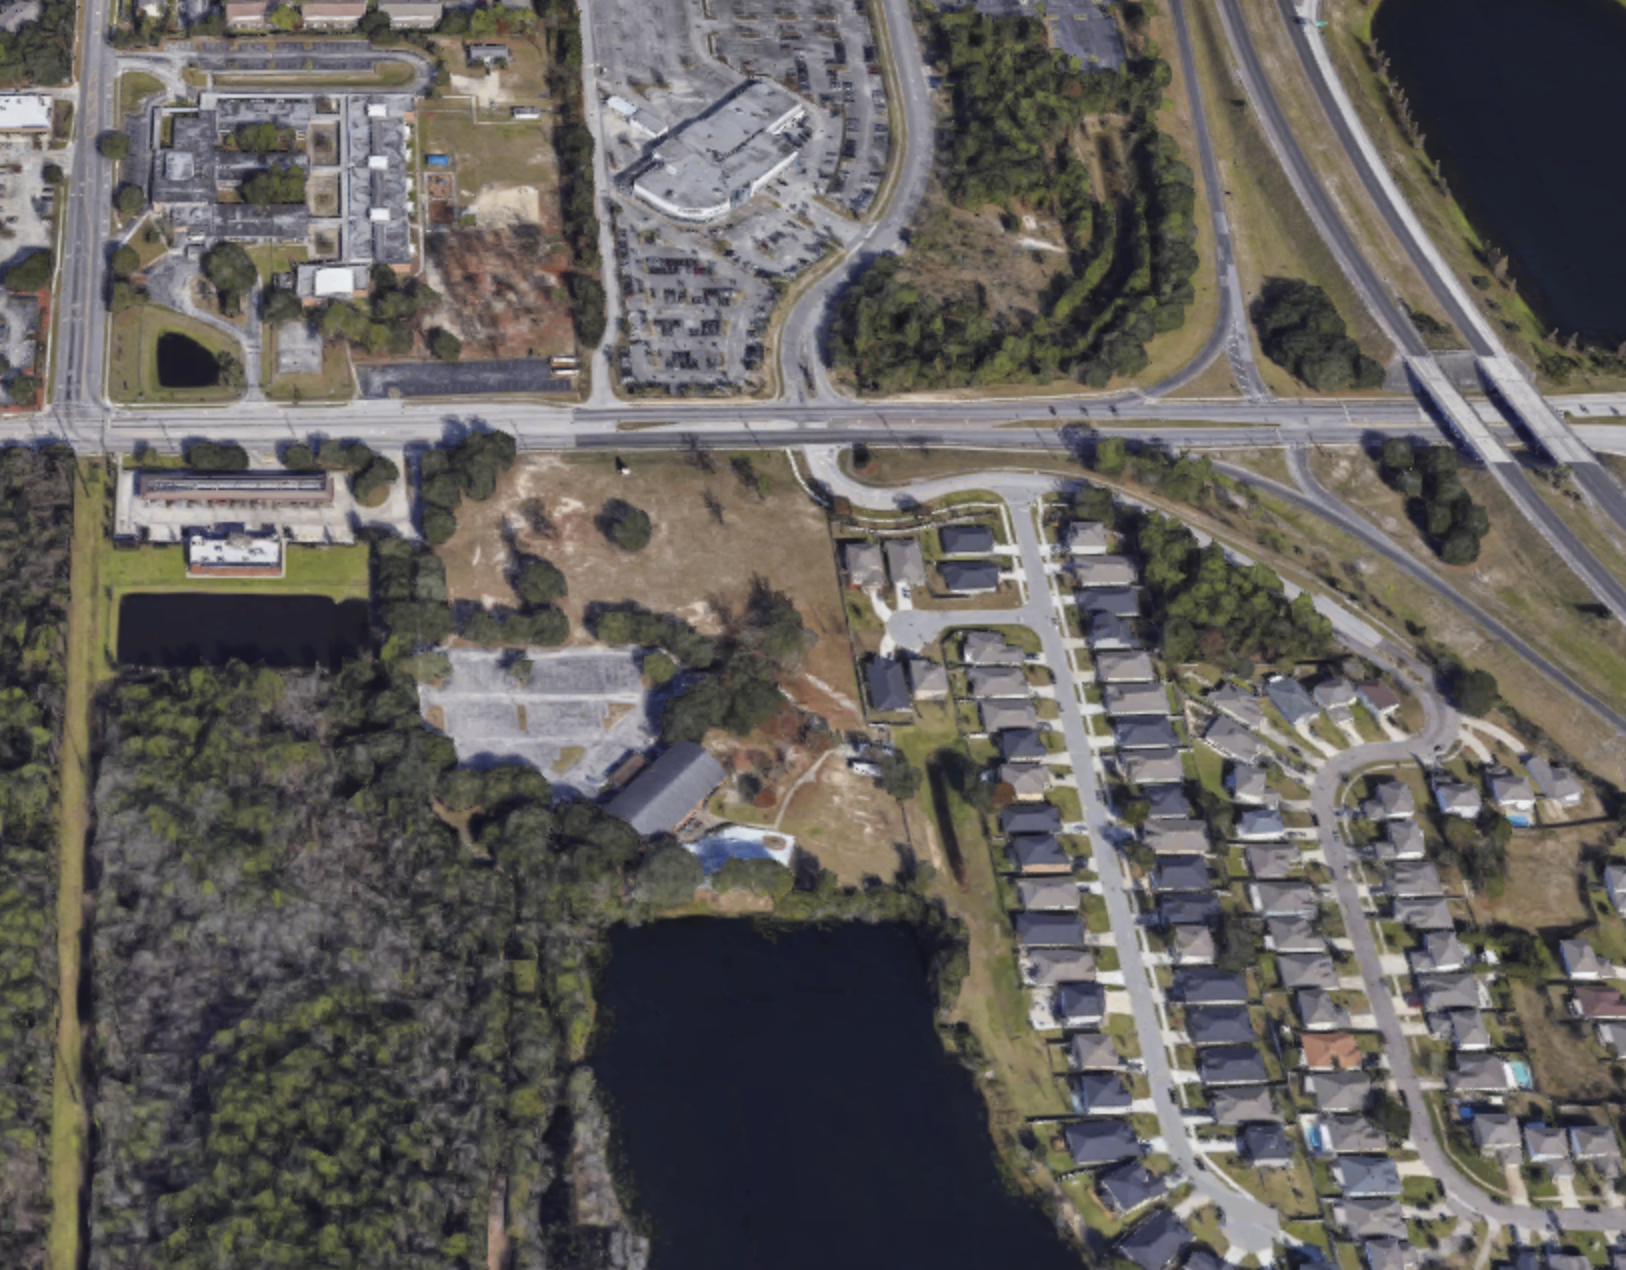 The site is west of Interstate 95 across the street from Merrill Road Elementary School.